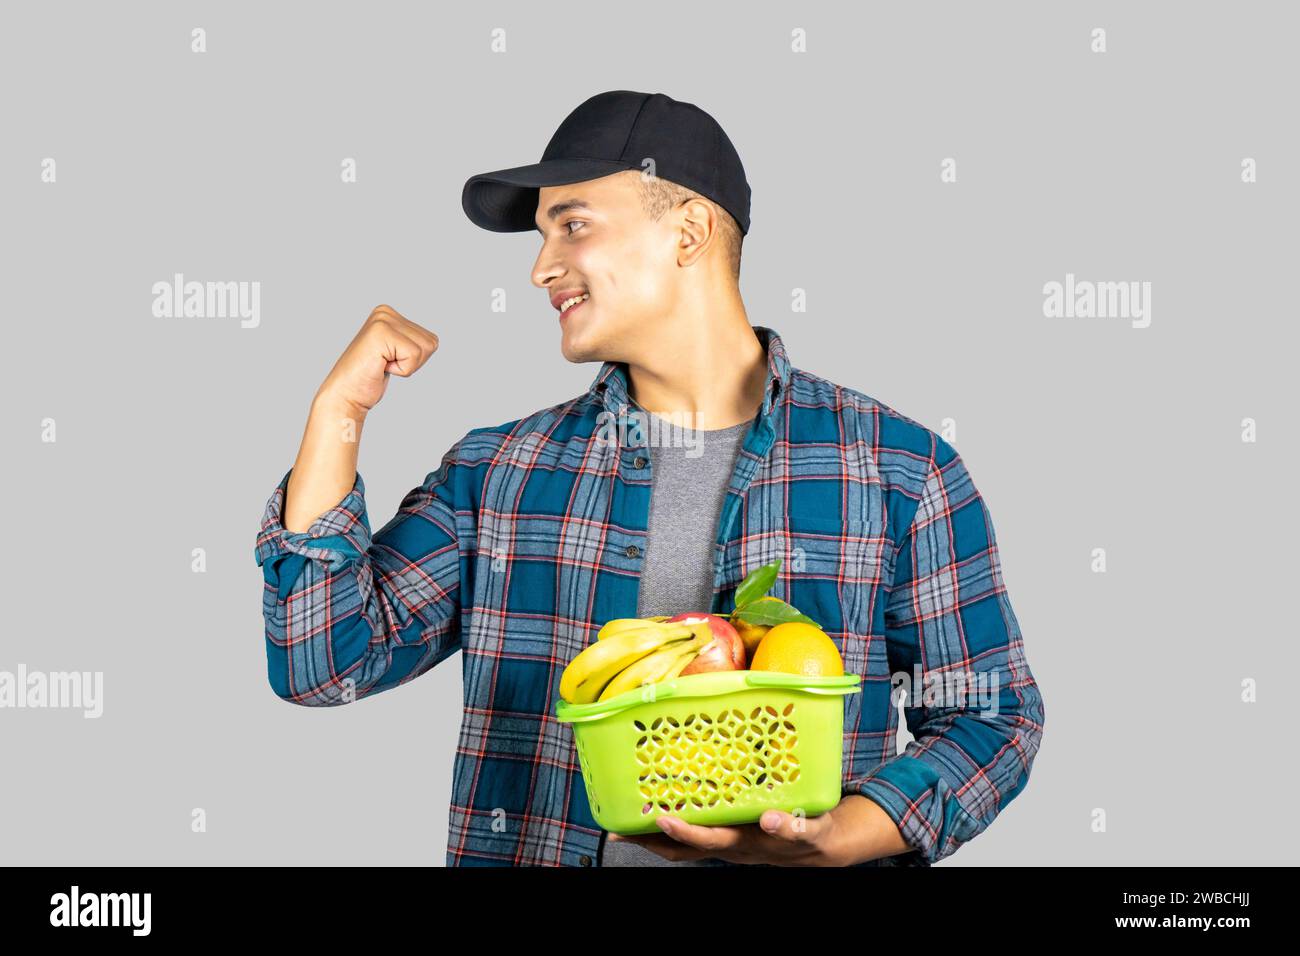 Young Asian Muscular and Healthy Male Farmer Promoting Organic Lifestyle with Fruit and Fruit Basket Stock Photo